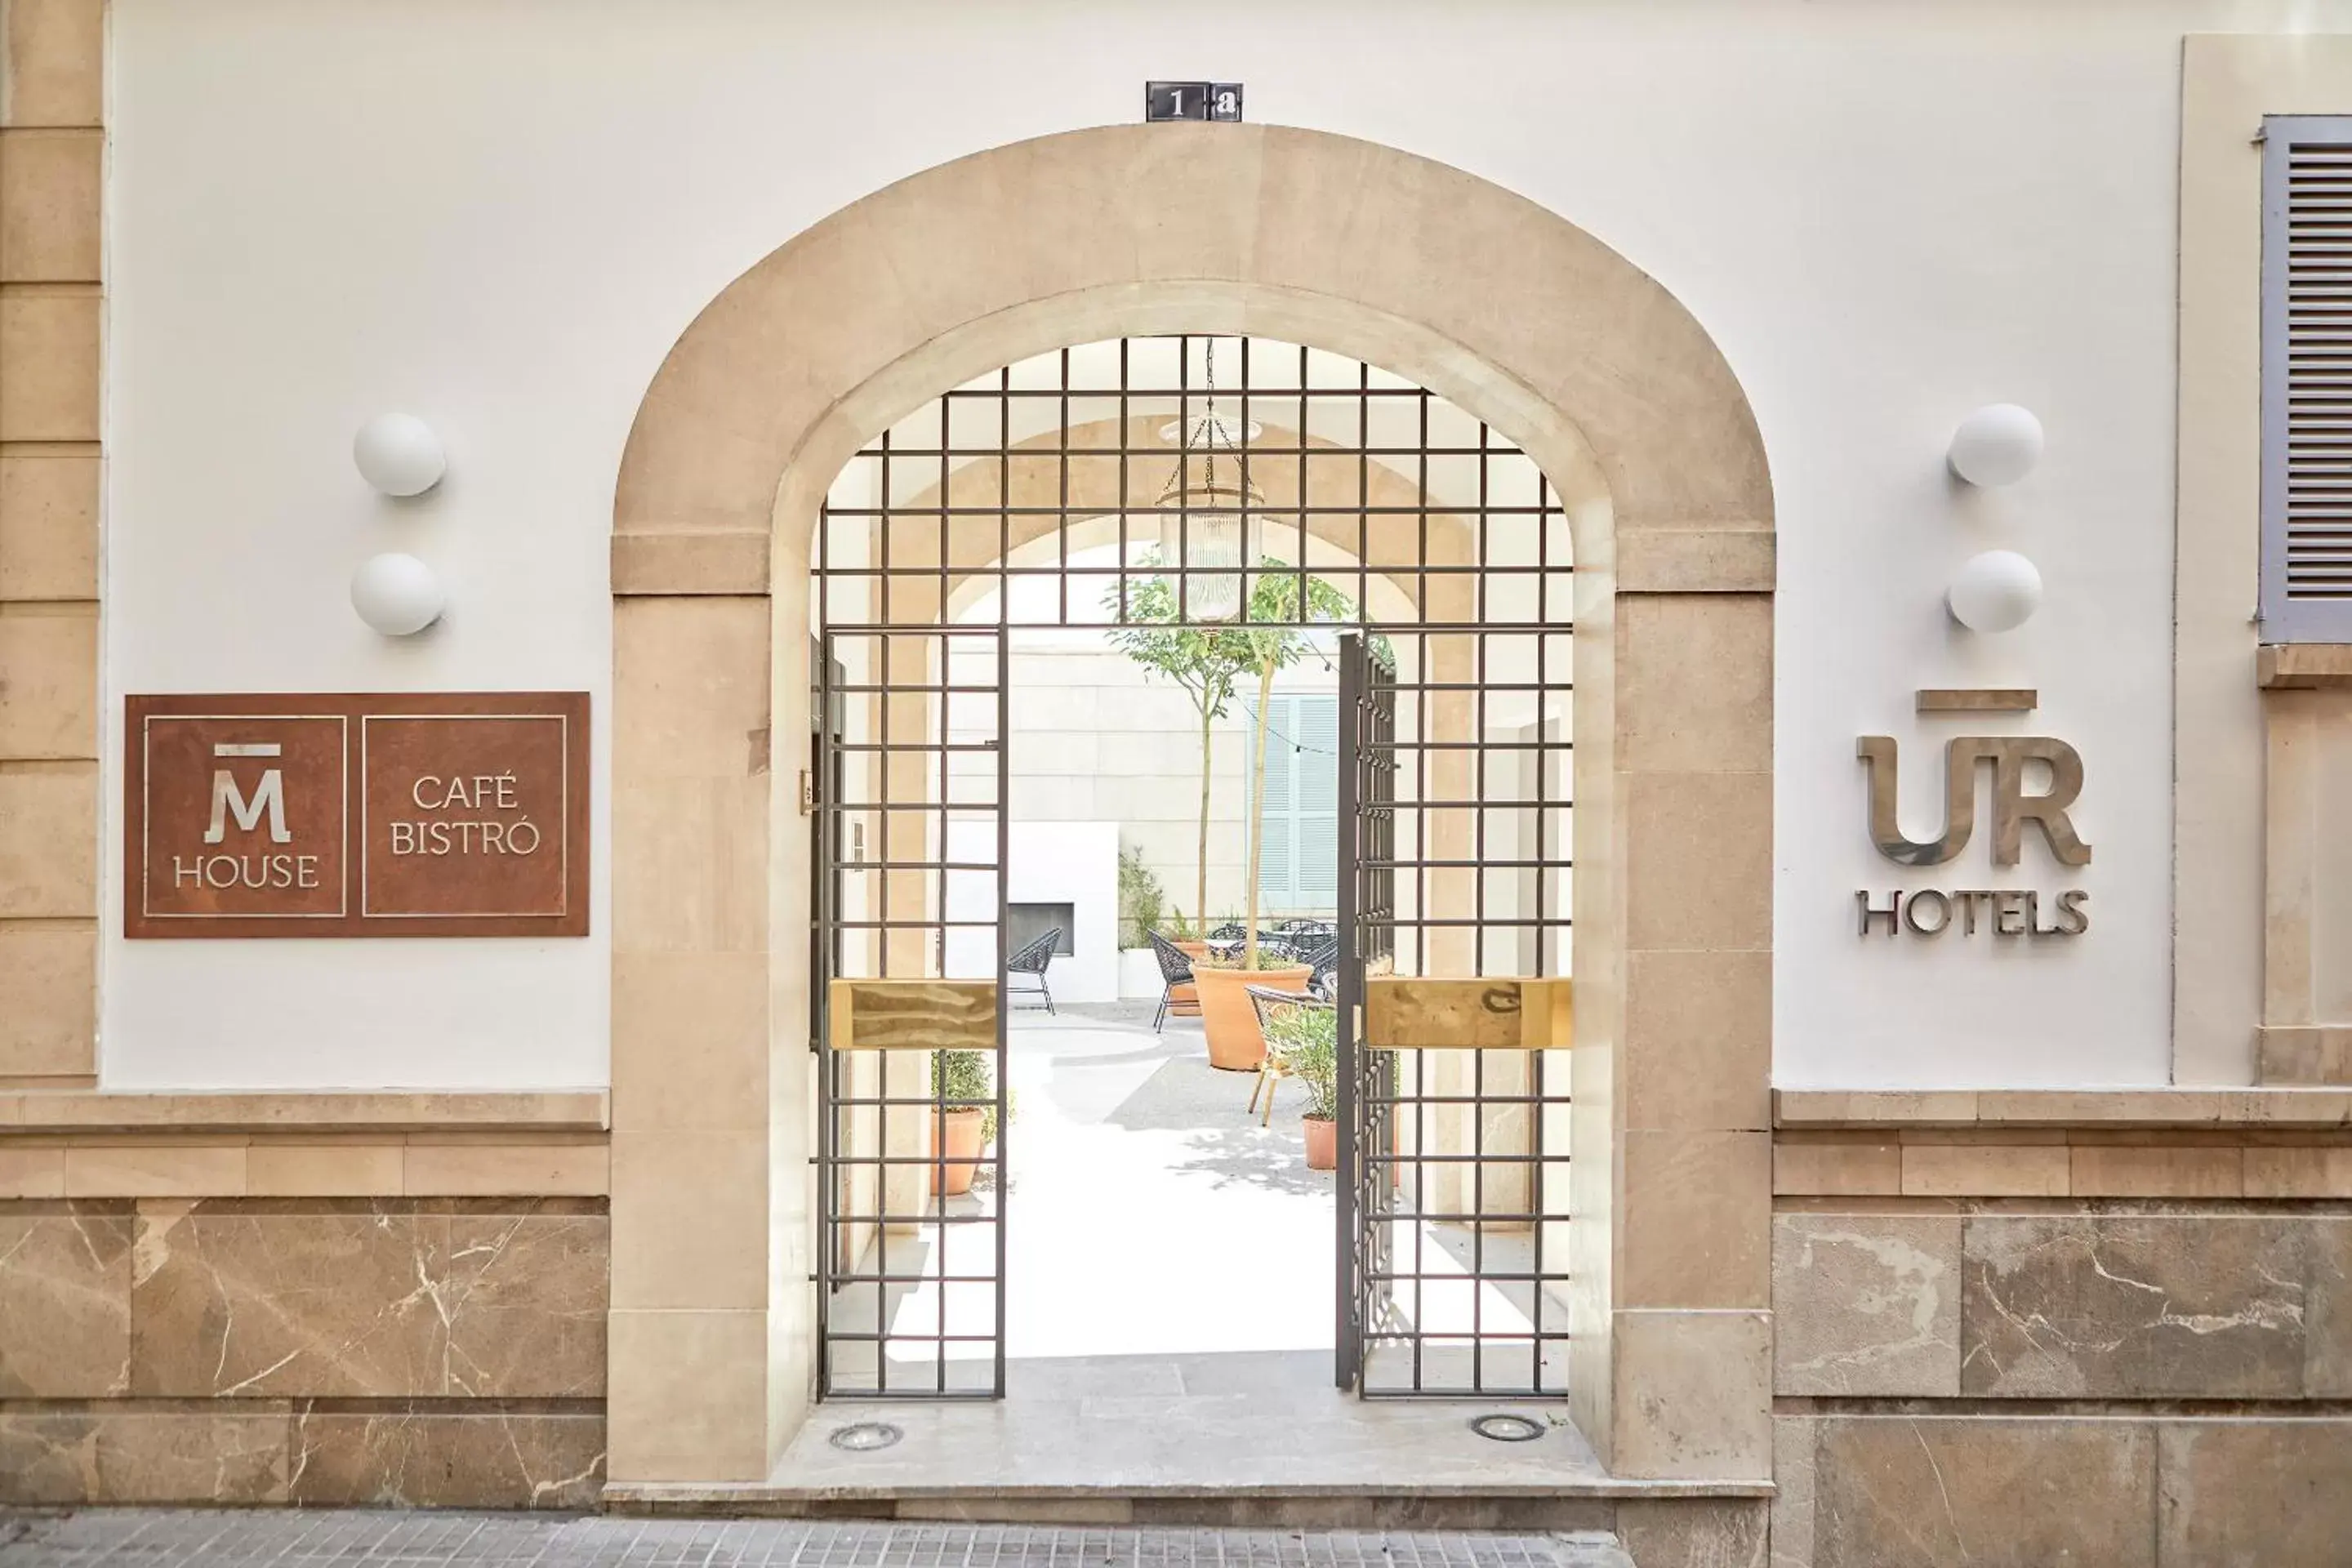 Property building in MHOUSE Boutique Hotel Palma